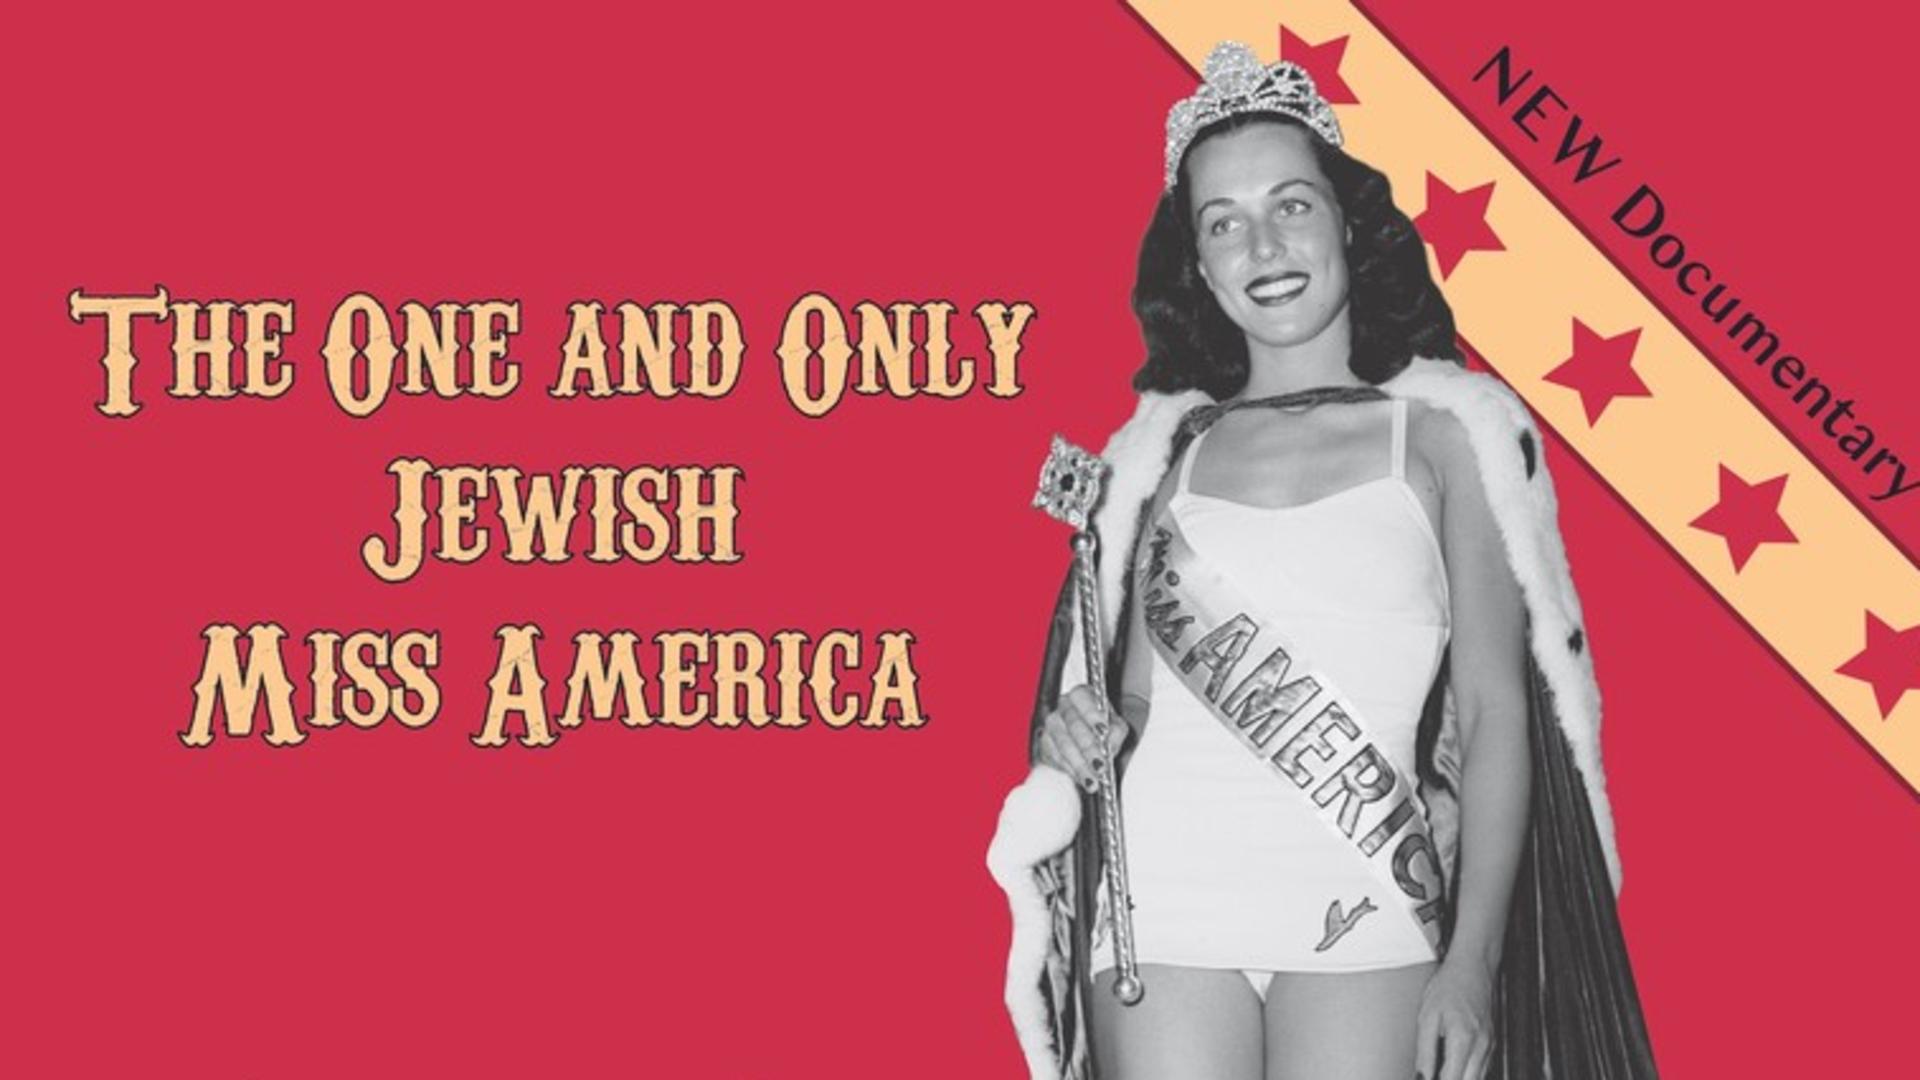 The One and Only Jewish Miss America